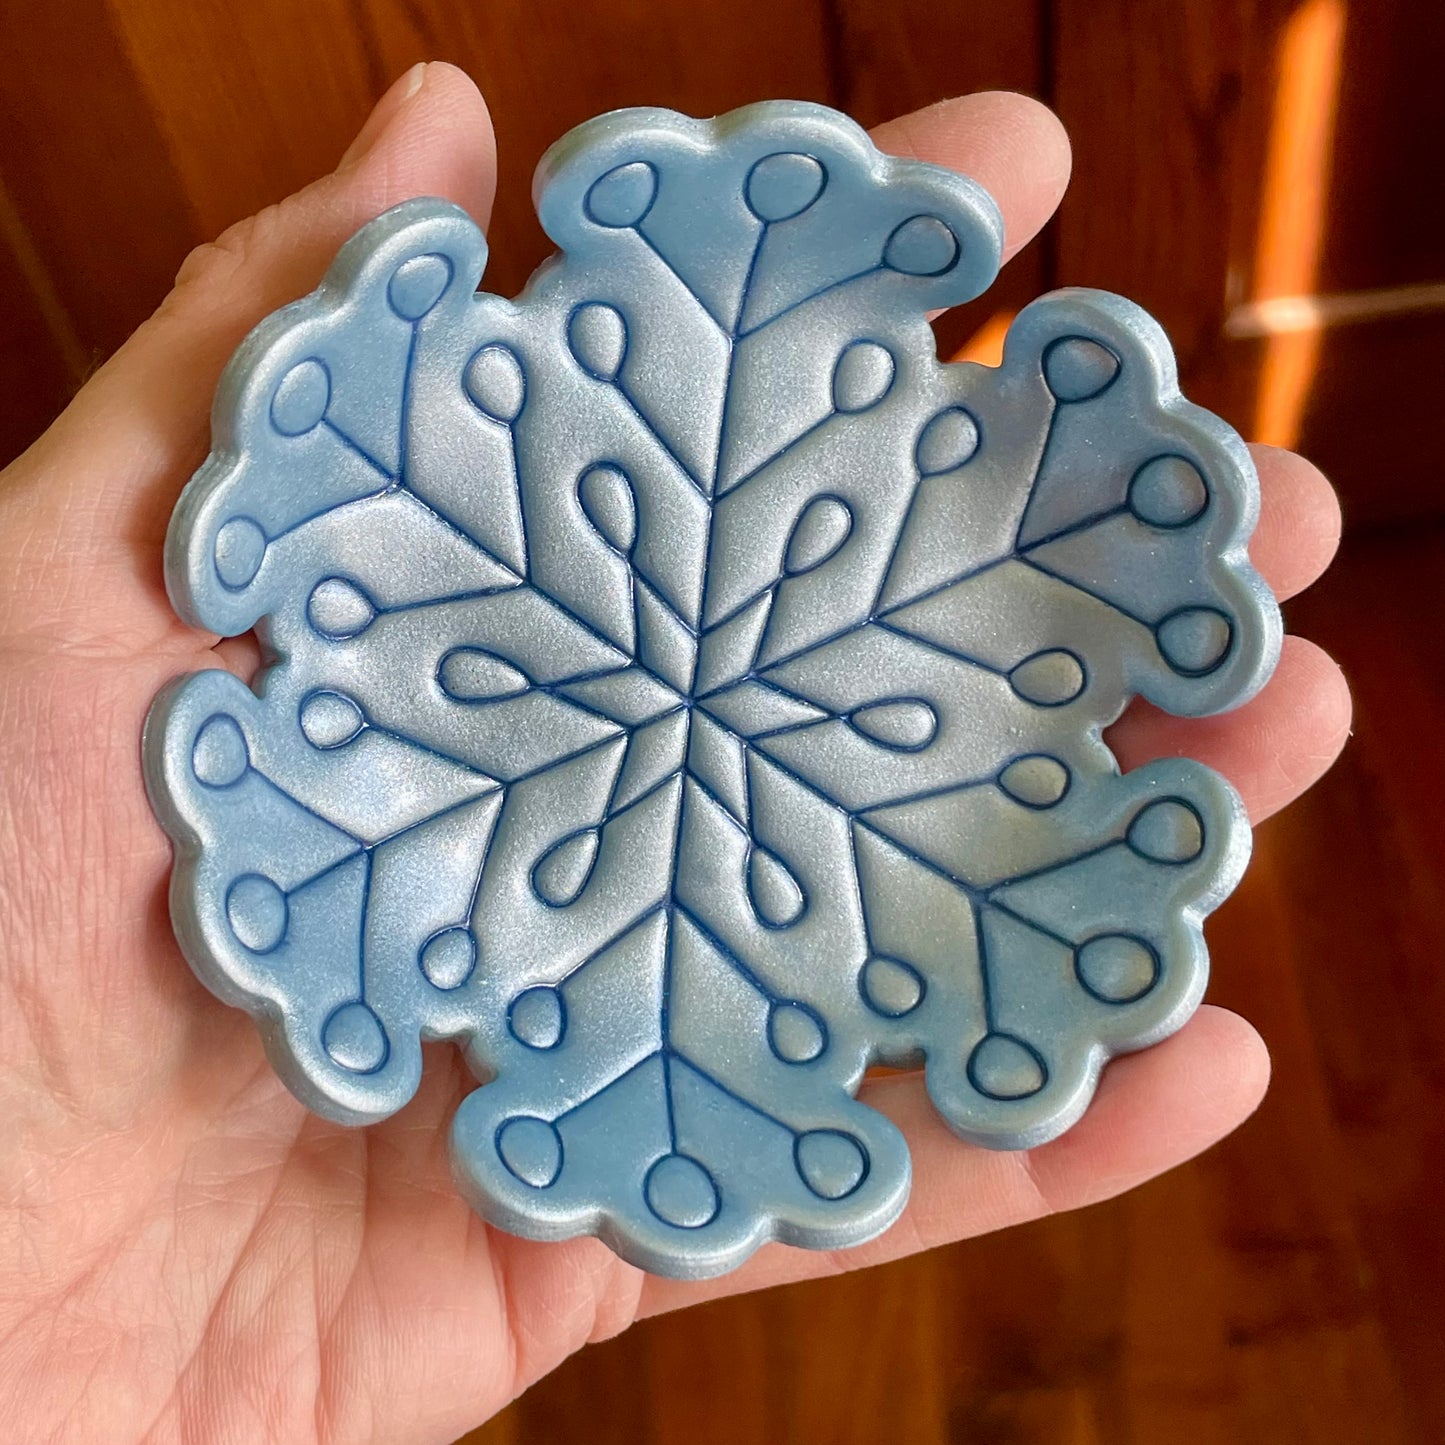 Snowflake large cutter - perfect for making ring dishes or coasters